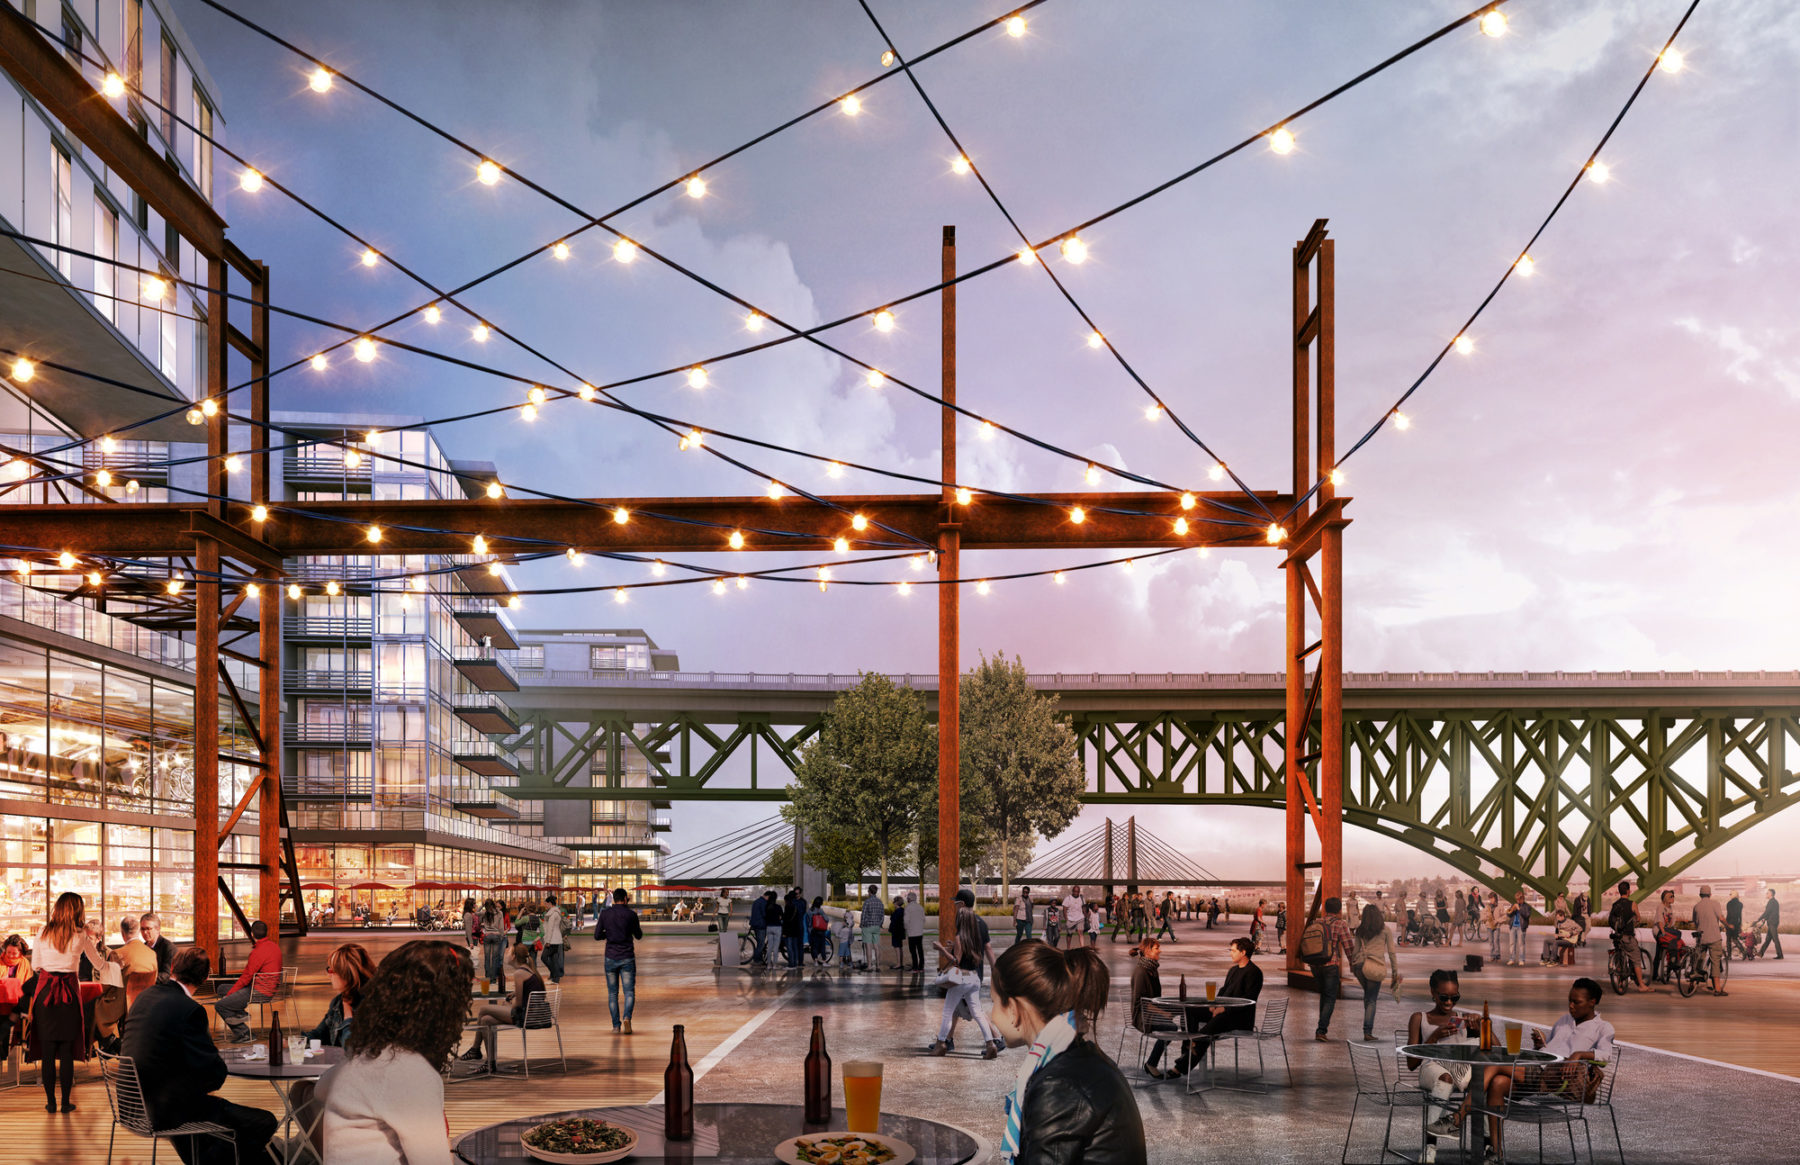 Dusk rendering of open seating areas with industrial and multi-use structures in background